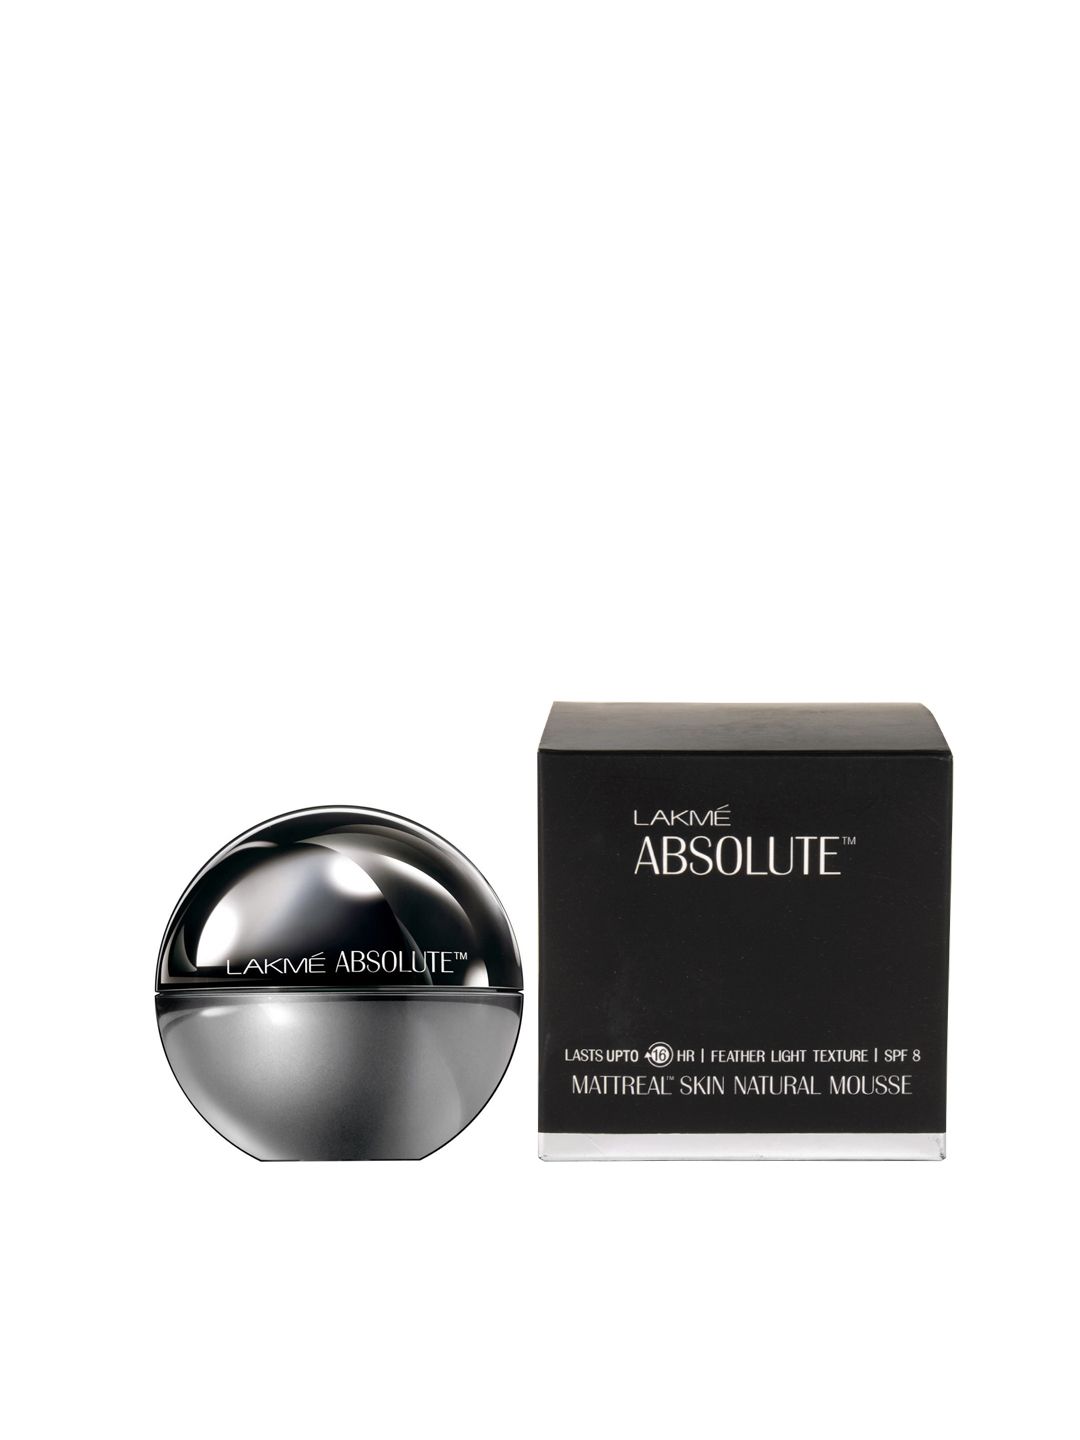 Lakme Absolute Mattreal Skin Natural Mousse - Almond Honey 06 25g Price in India